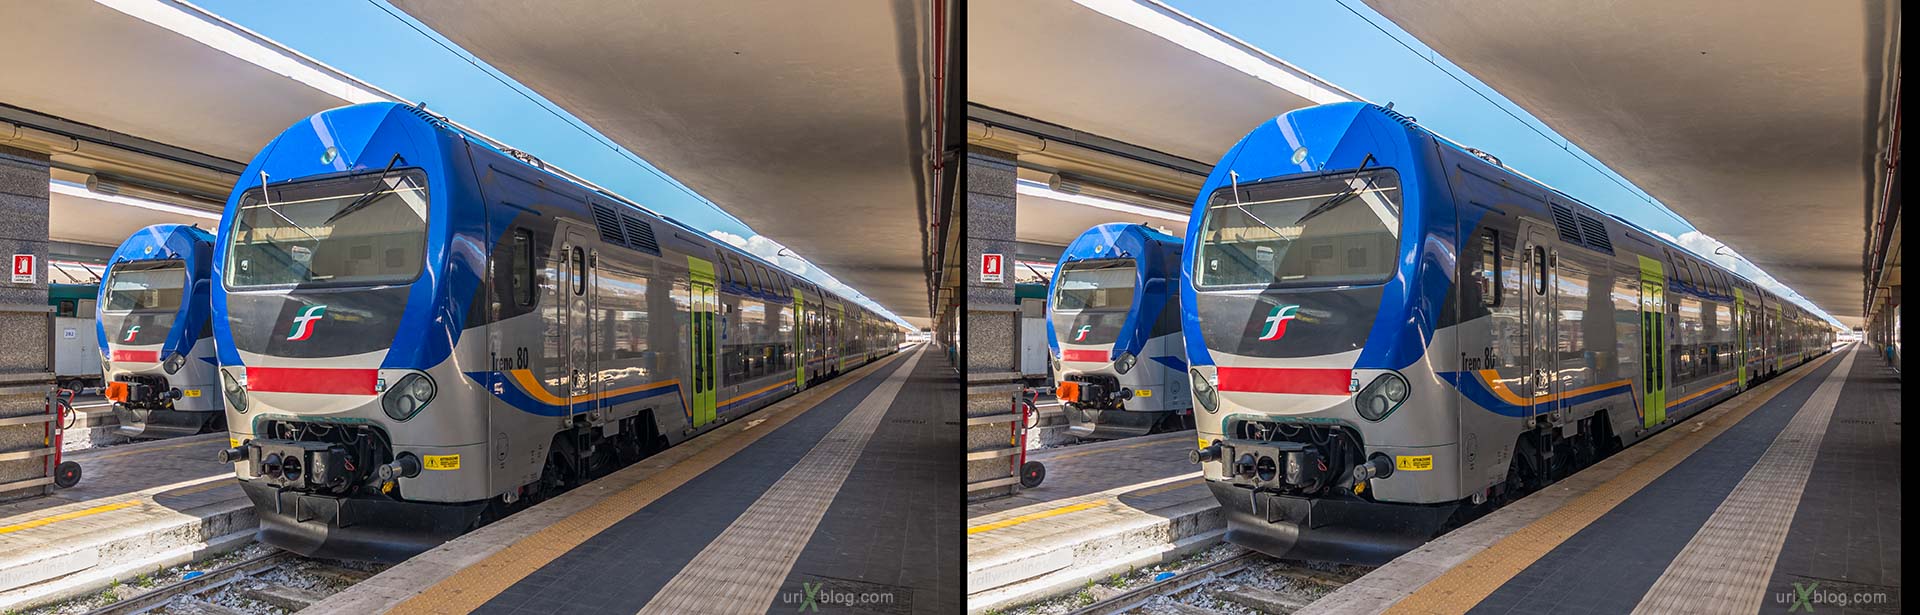 Napoli Centrale, Naples, train station, train, electric locomotive, Italy, 3D, stereo pair, cross-eyed, crossview, cross view stereo pair, stereoscopic